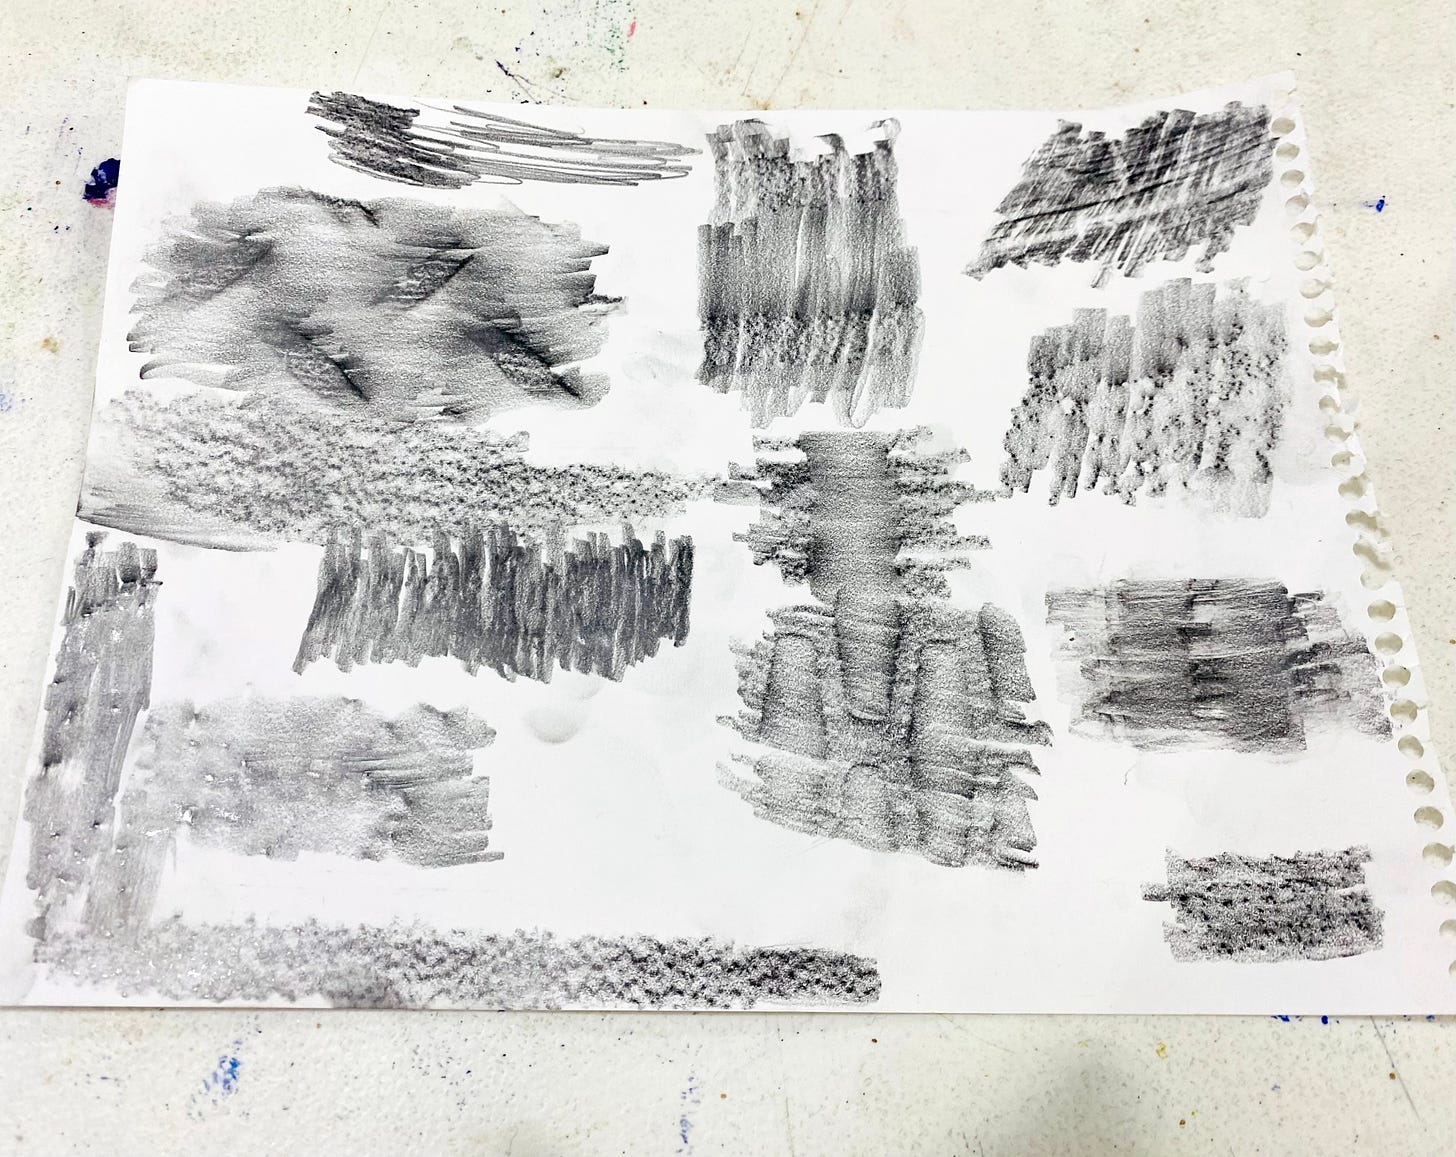 A white sheet of paper with different sections of graphite rubbings of materials including the table, chair, and wood.